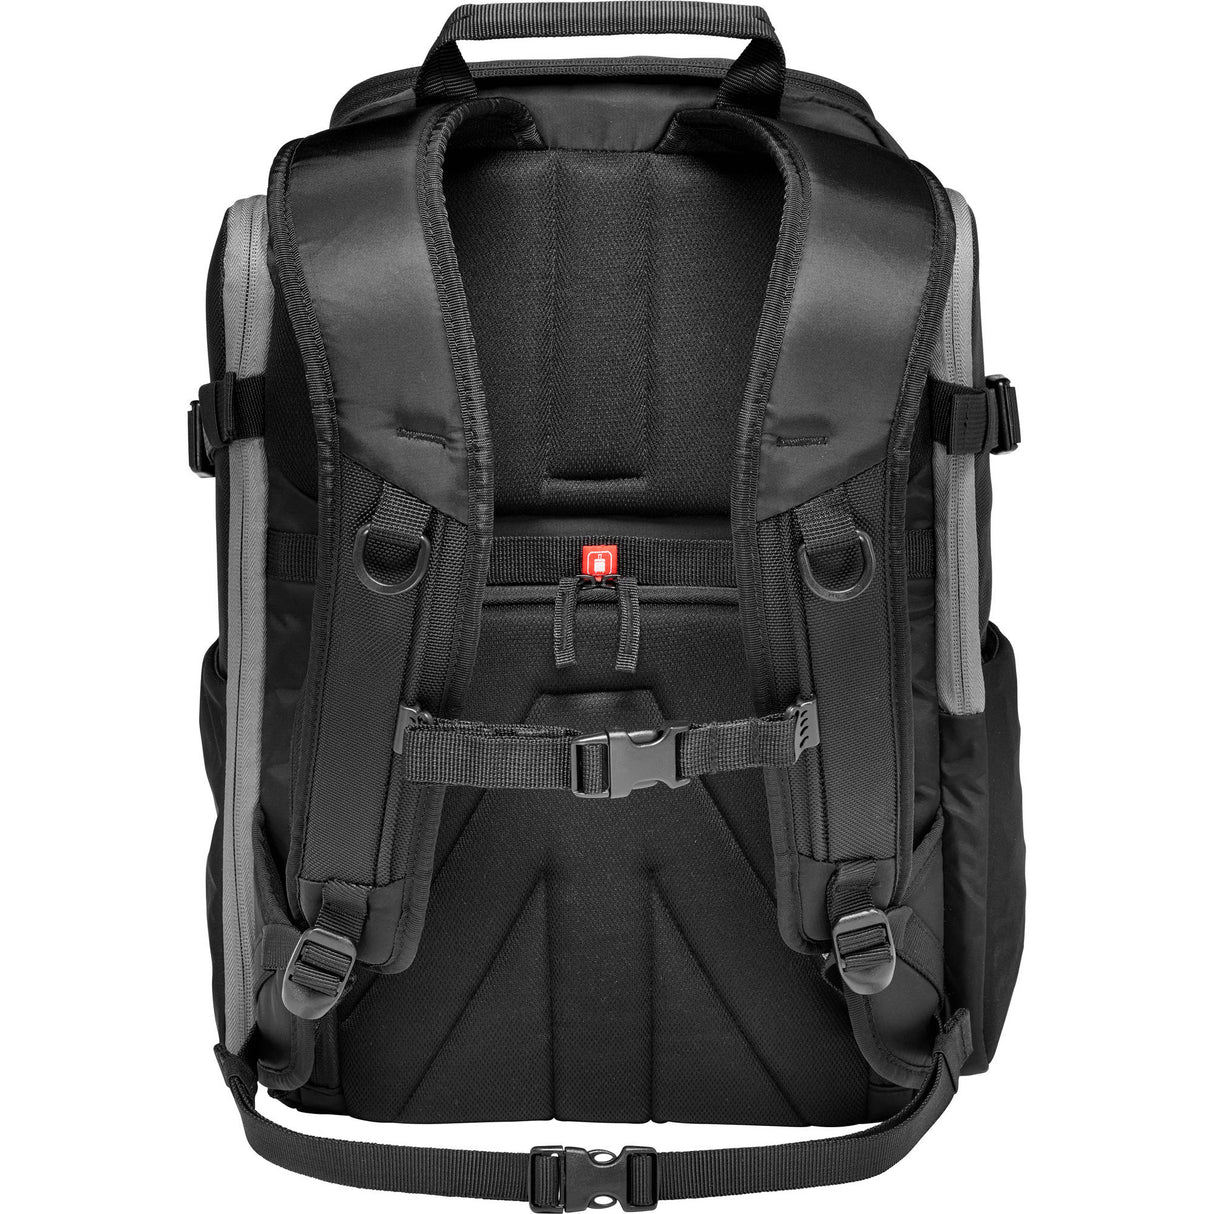 Manfrotto Rear Access Advanced Camera and Laptop Backpack (Black)